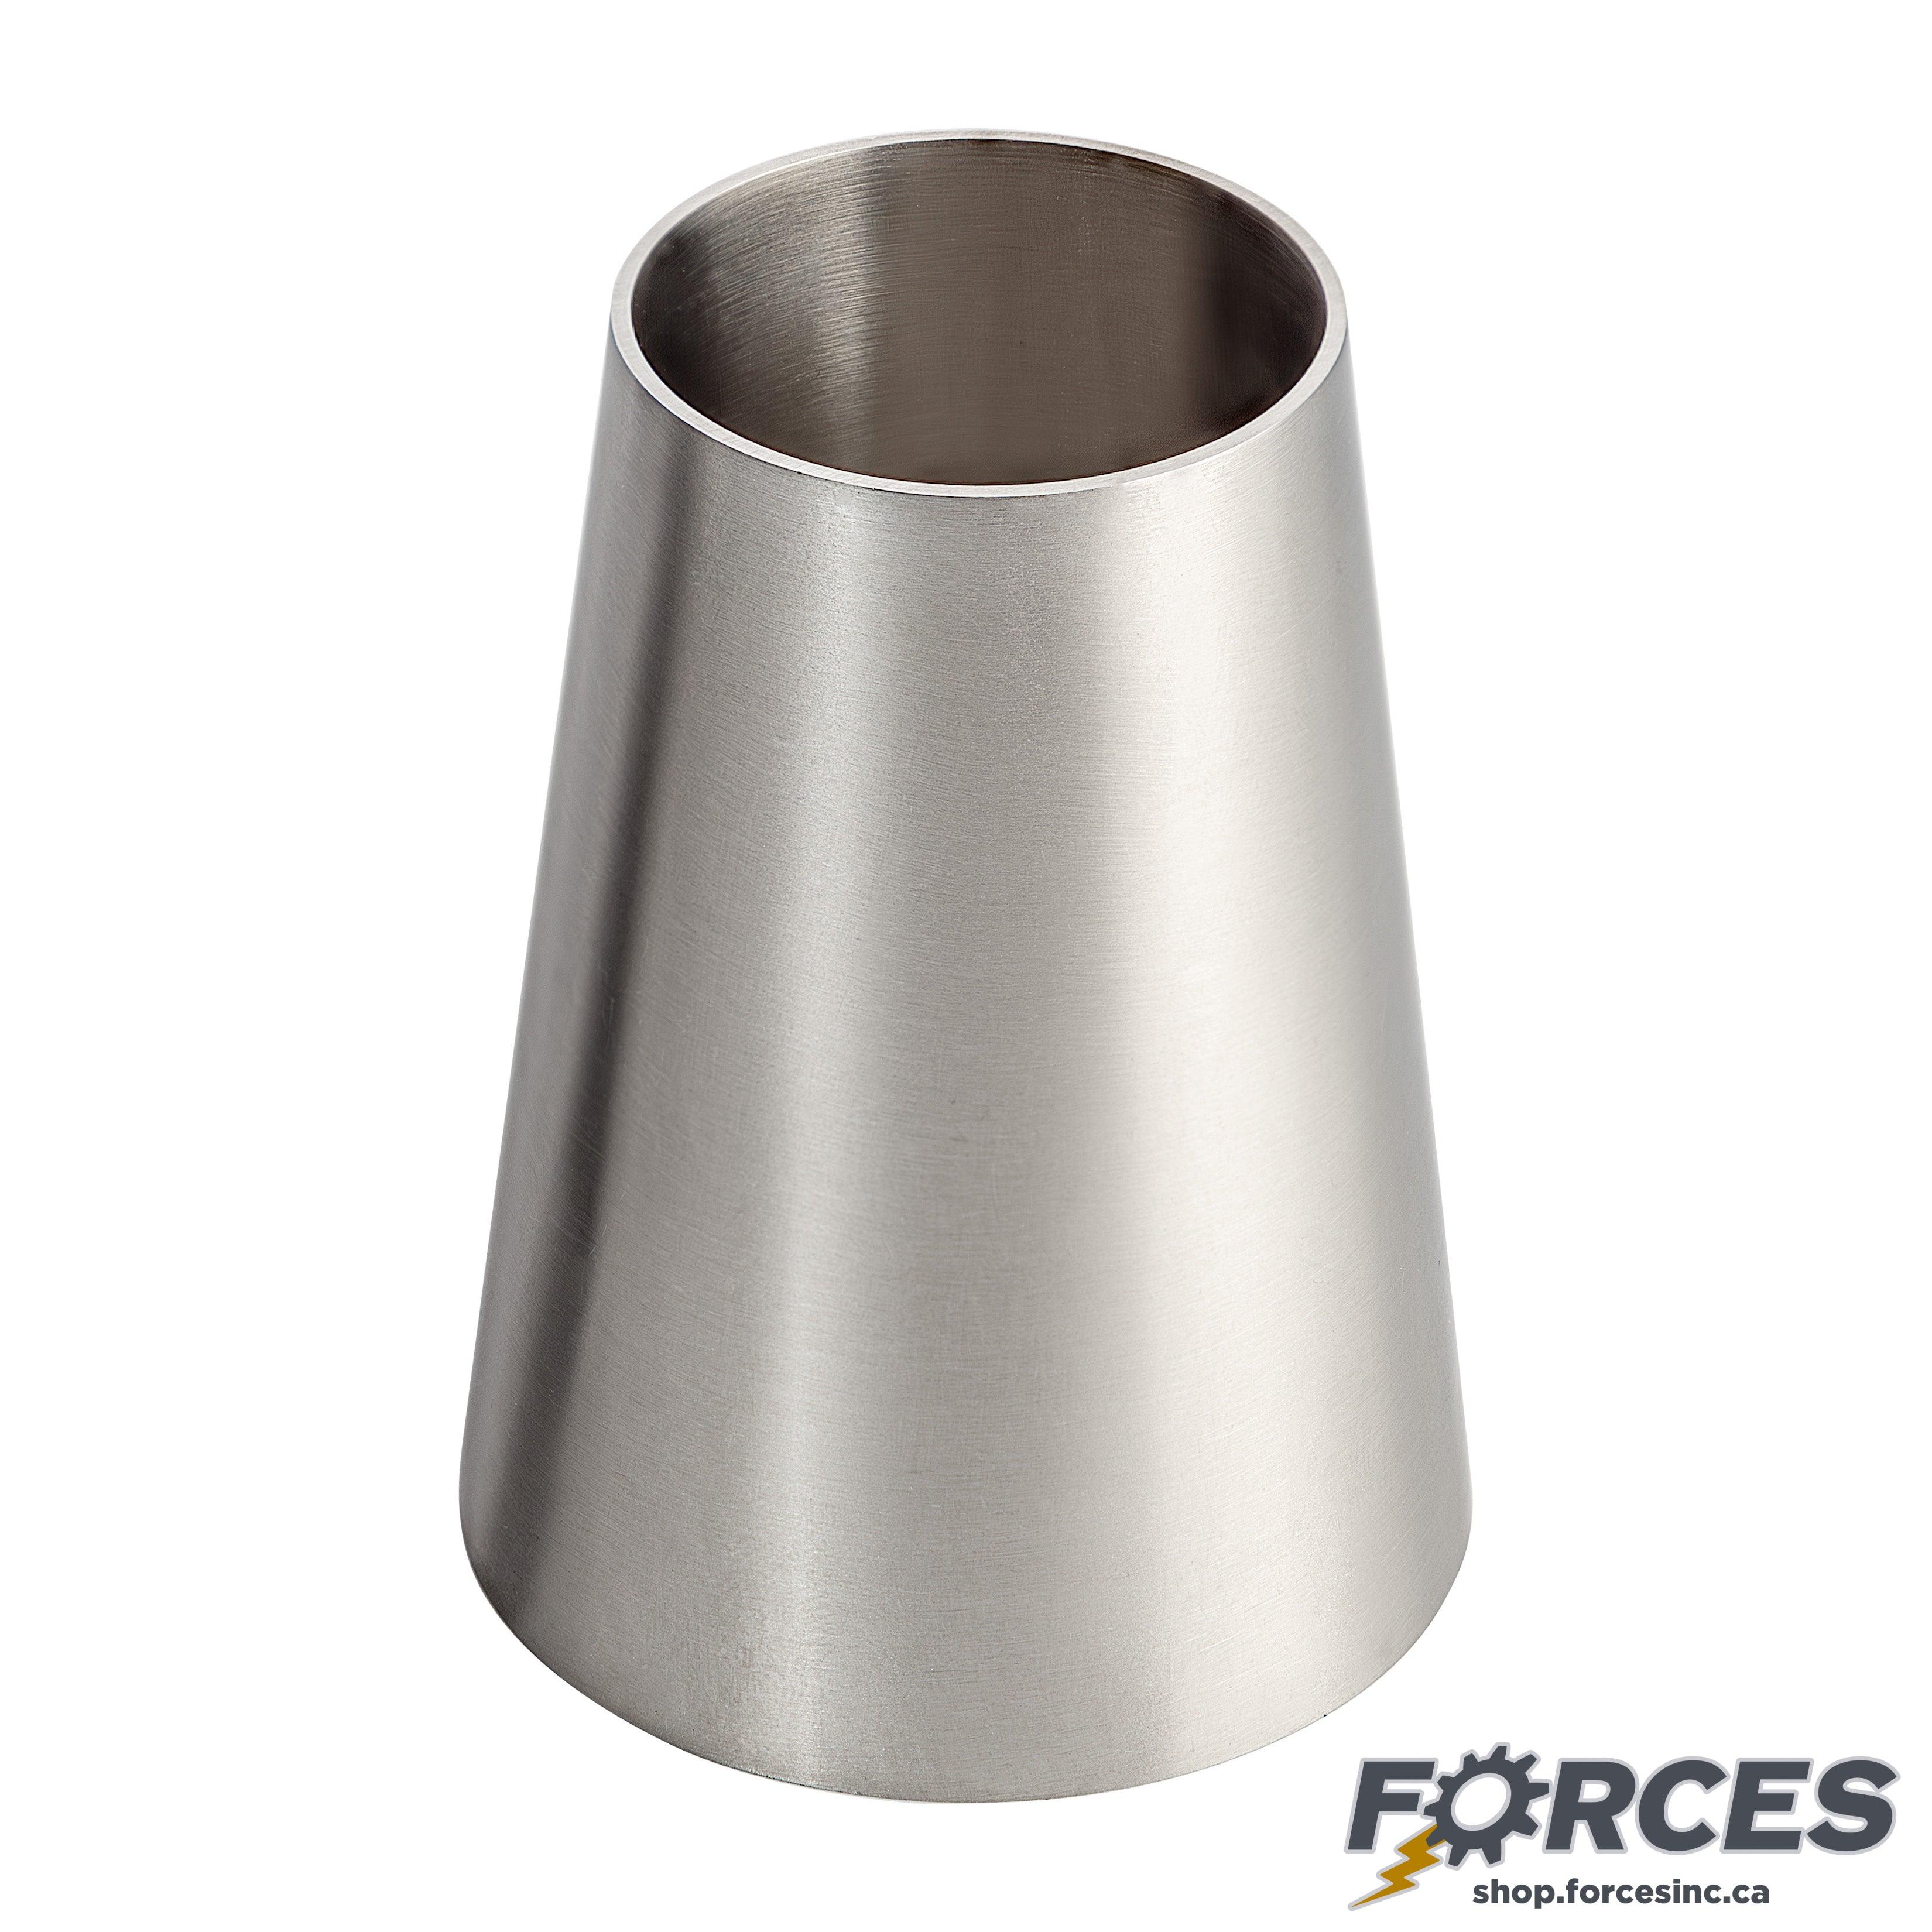 4" x 3" Butt Weld Concentric Reducer - Stainless Steel 316 - Forces Inc